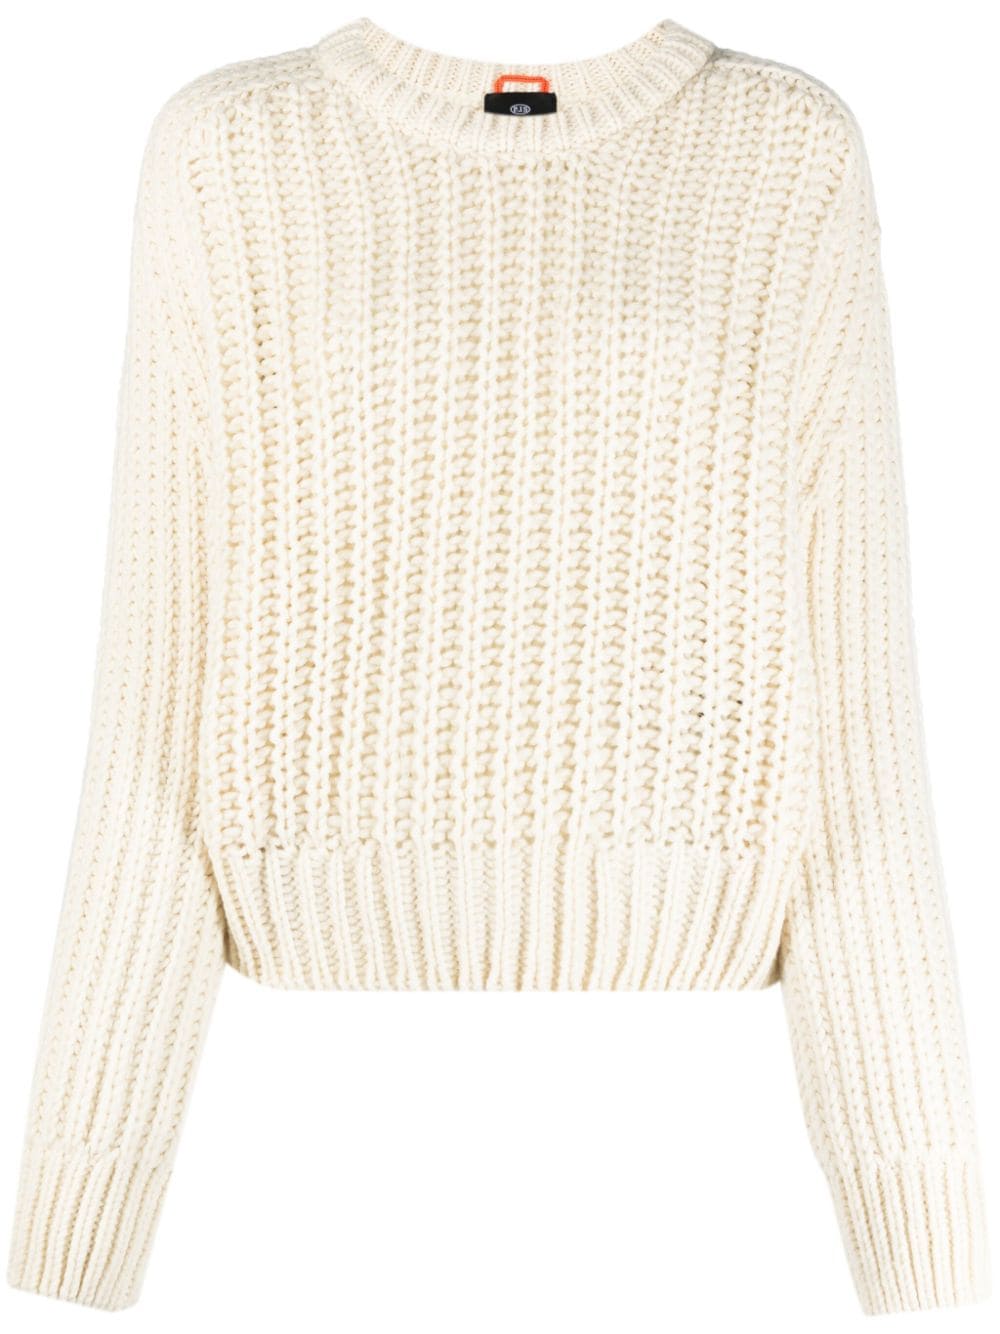 PARAJUMPERS CHUNKY FISHERMAN'S KNIT JUMPER